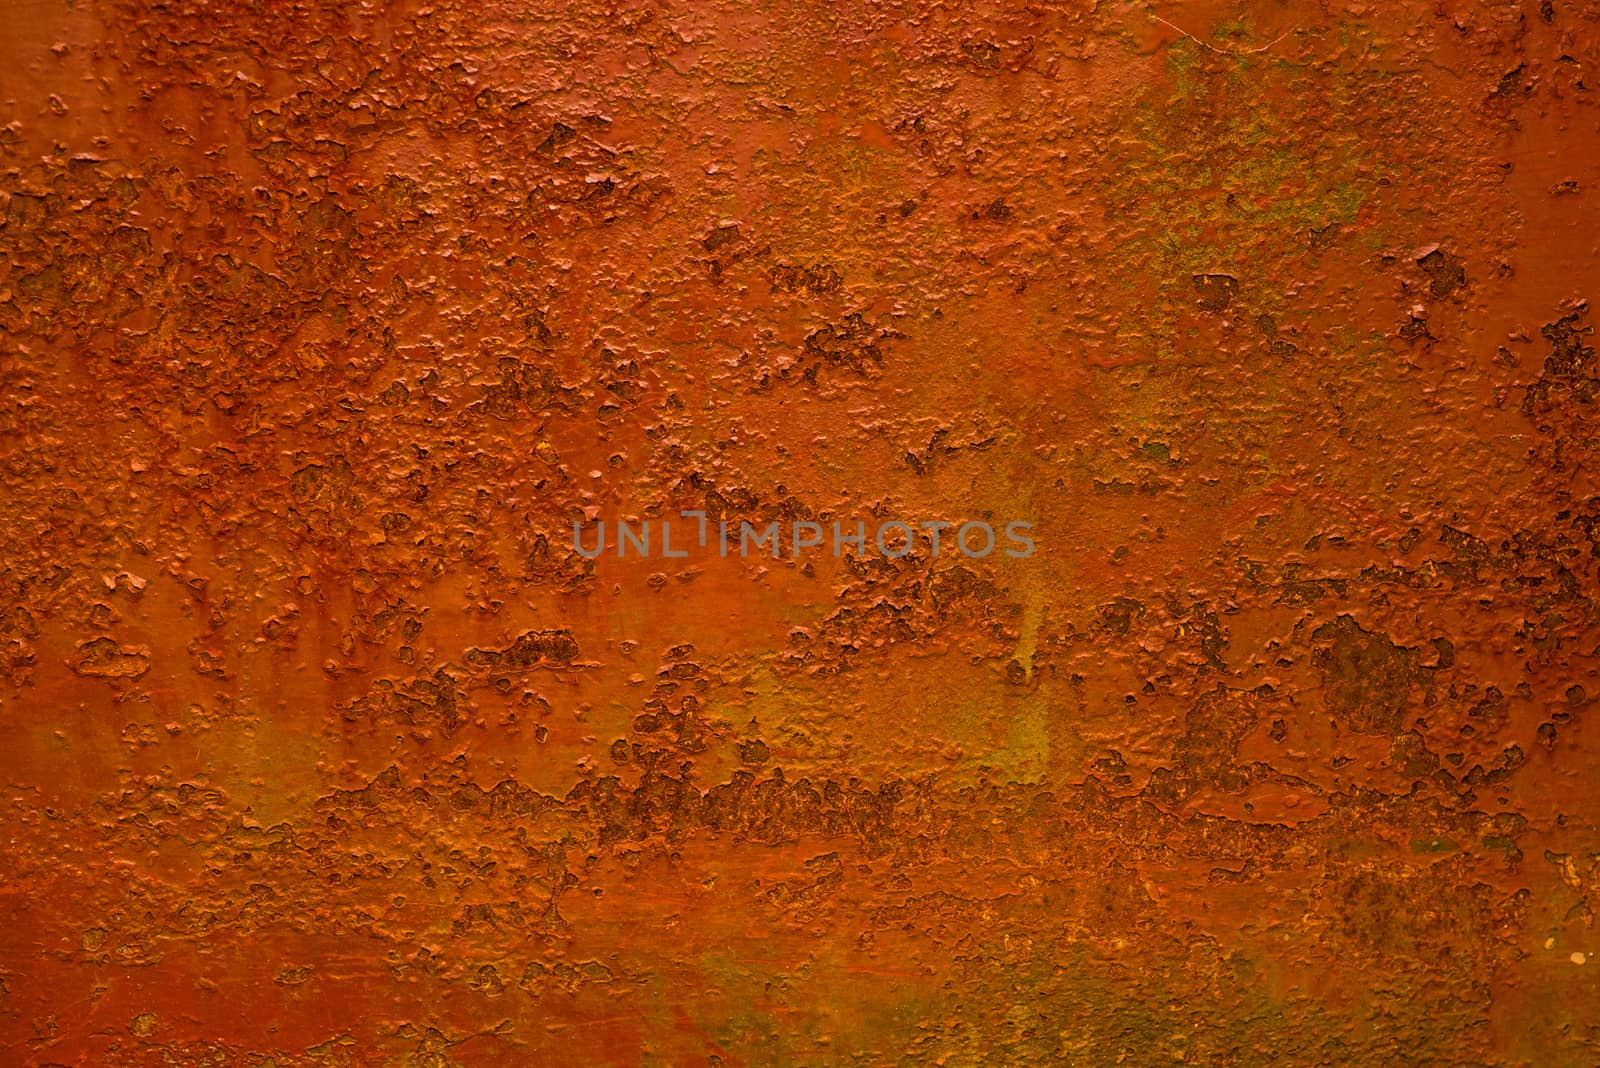 Abstract colorful image painted in orange on an outdoor rotten metal by gonzalobell